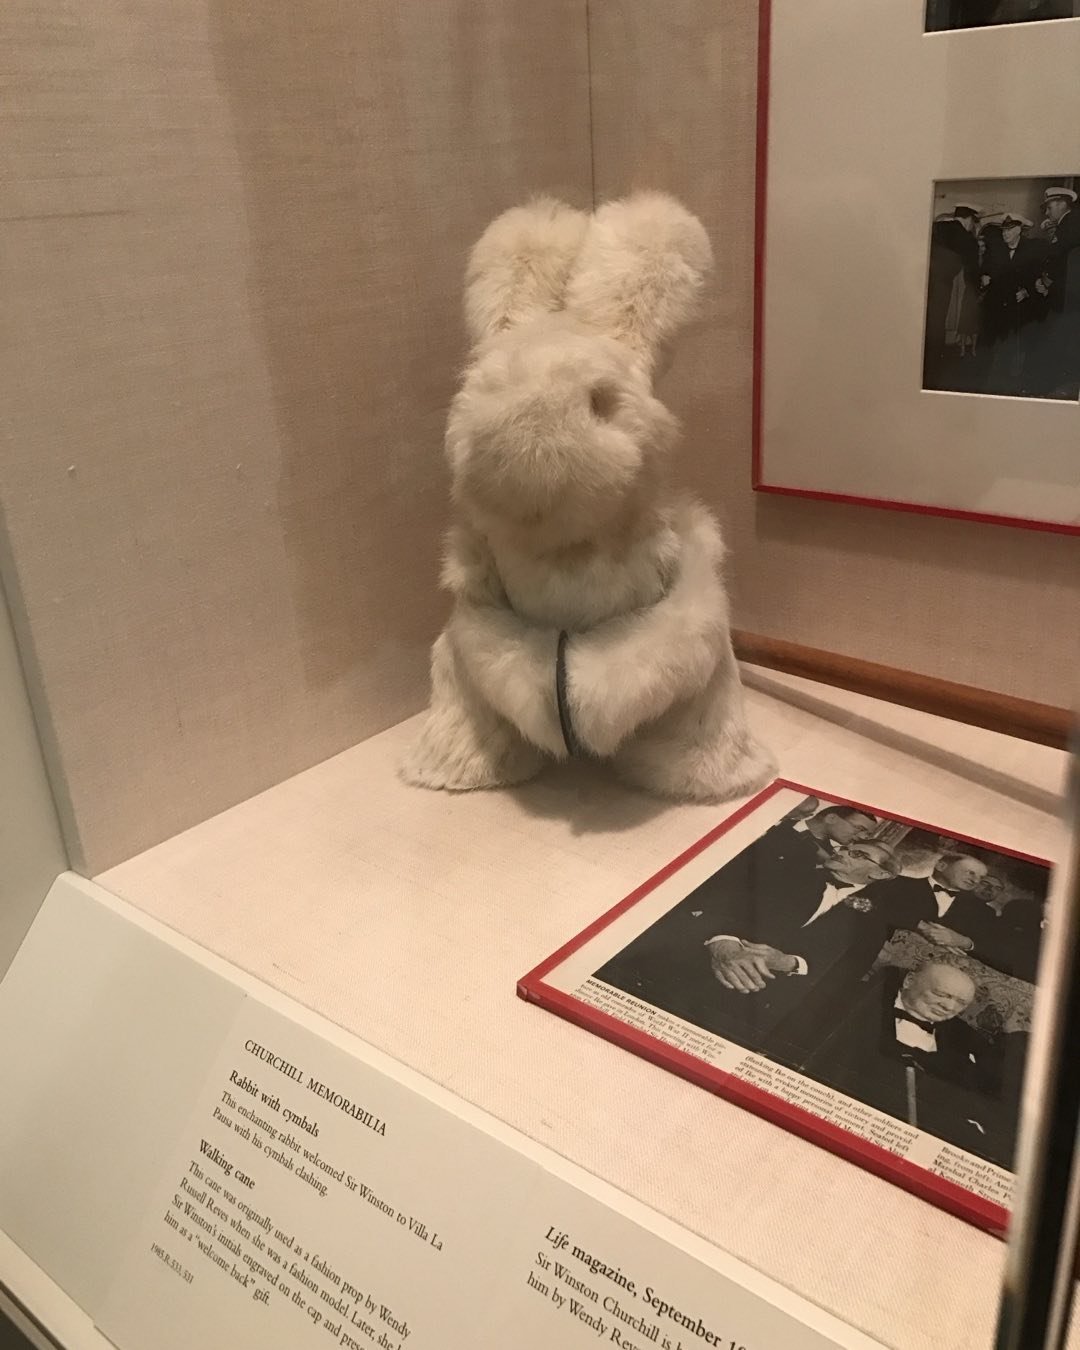 Today my phone reminded me that Winston Churchill had a stuffed bunny with cymbals and that I have met this bunny in person and so I&rsquo;ve basically met Winston Churchill. That&rsquo;s my #tinylittlejoy for the day.🐰